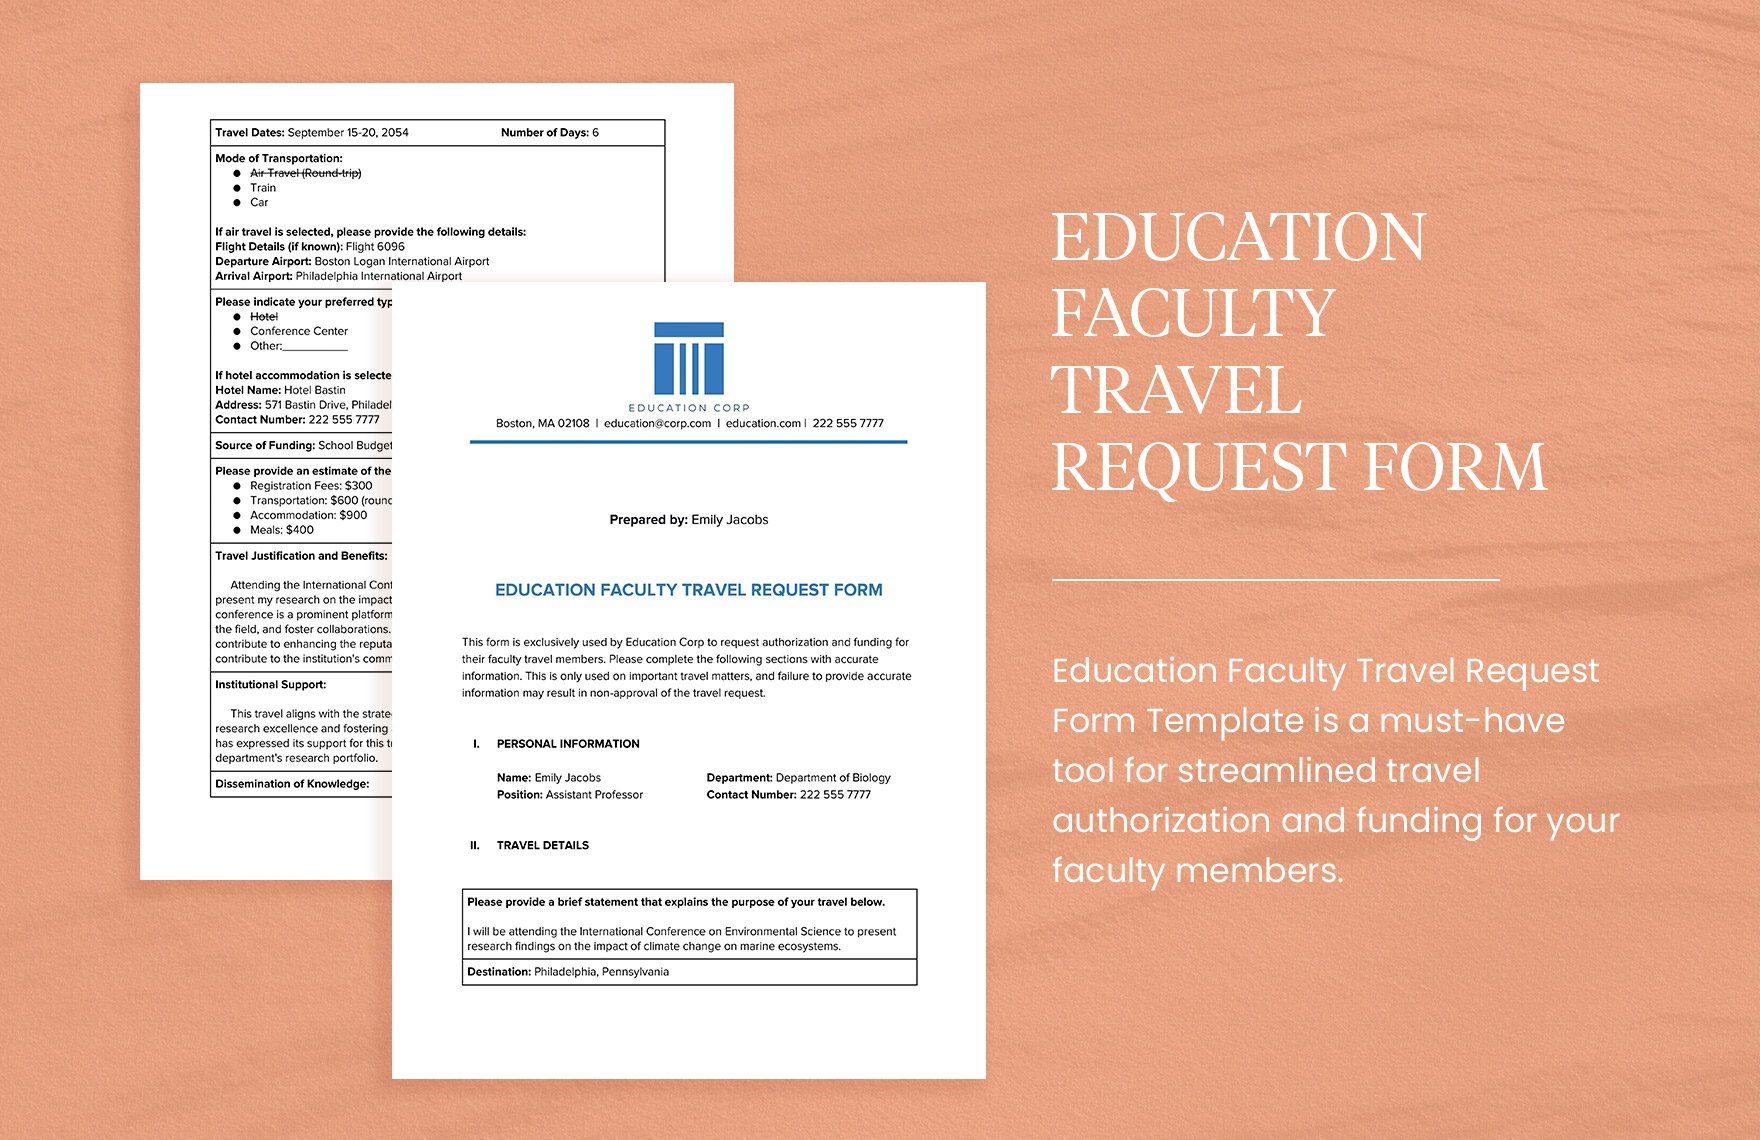 Education Faculty Travel Request Form